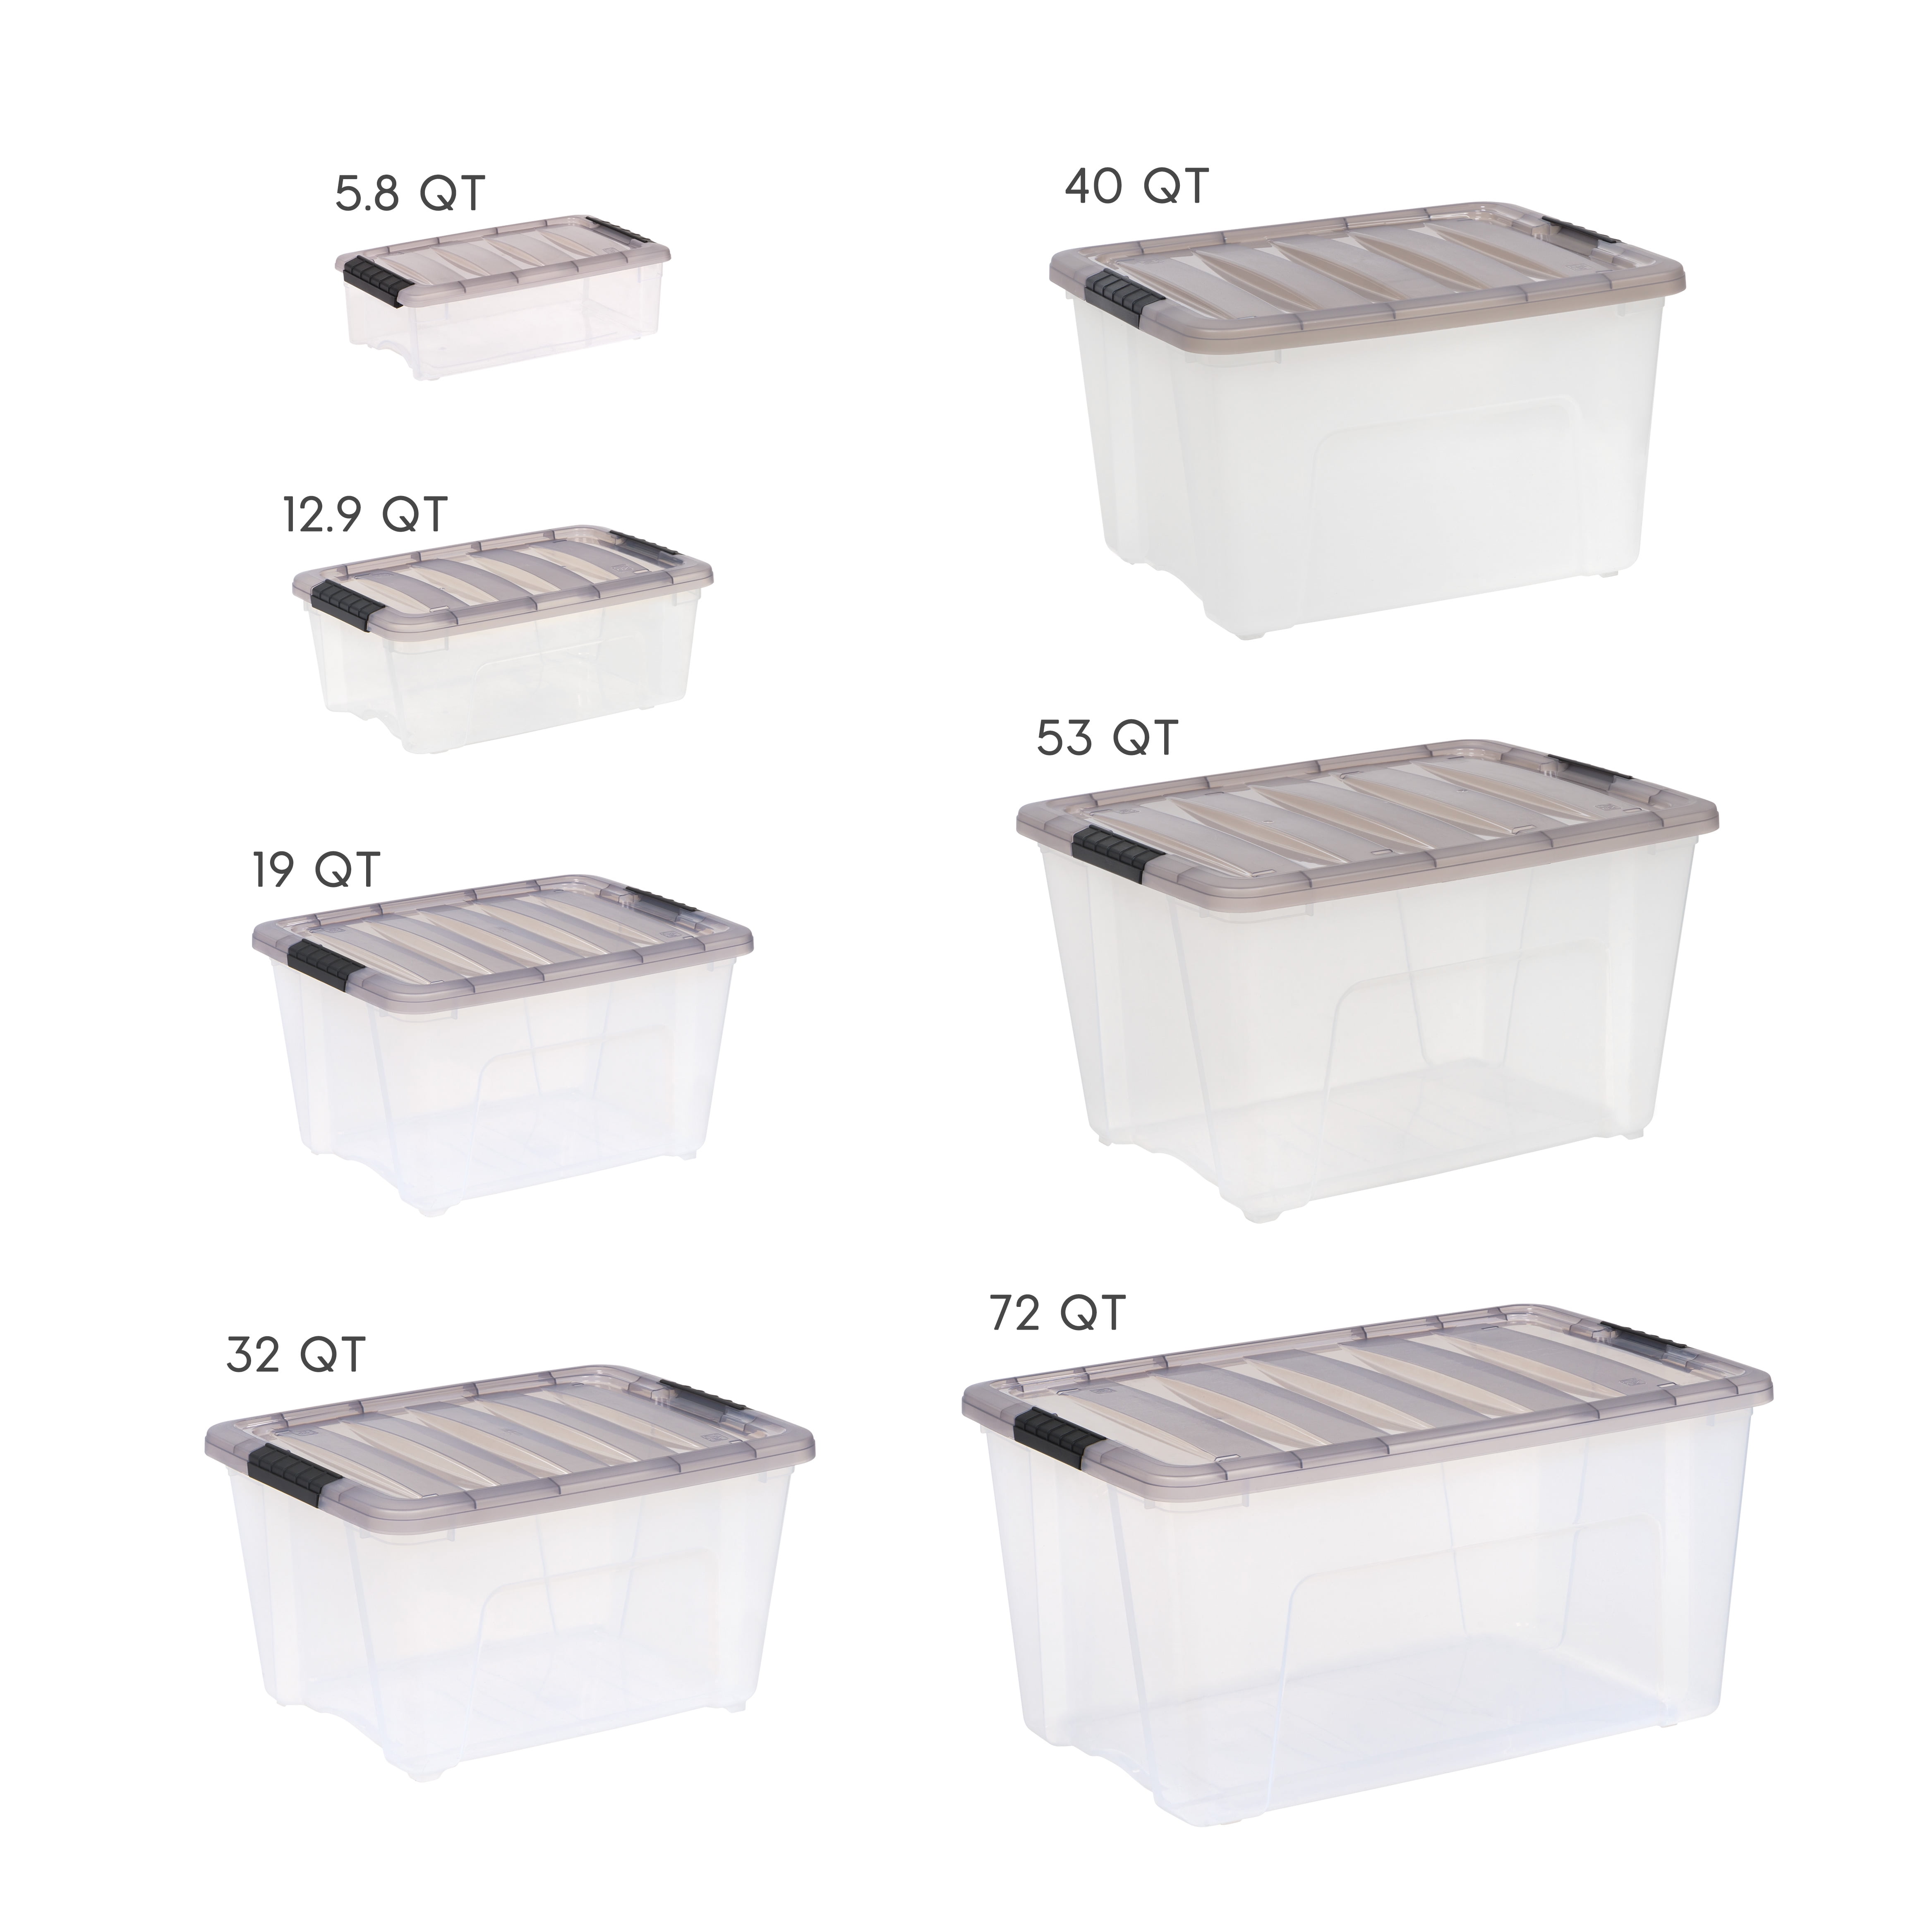 IRIS USA 5 Quart Stackable Plastic Storage Bins with Lids and Latching  Buckles, 10 Pack - Clear, Containers with Lids and Latches, Durable  Nestable